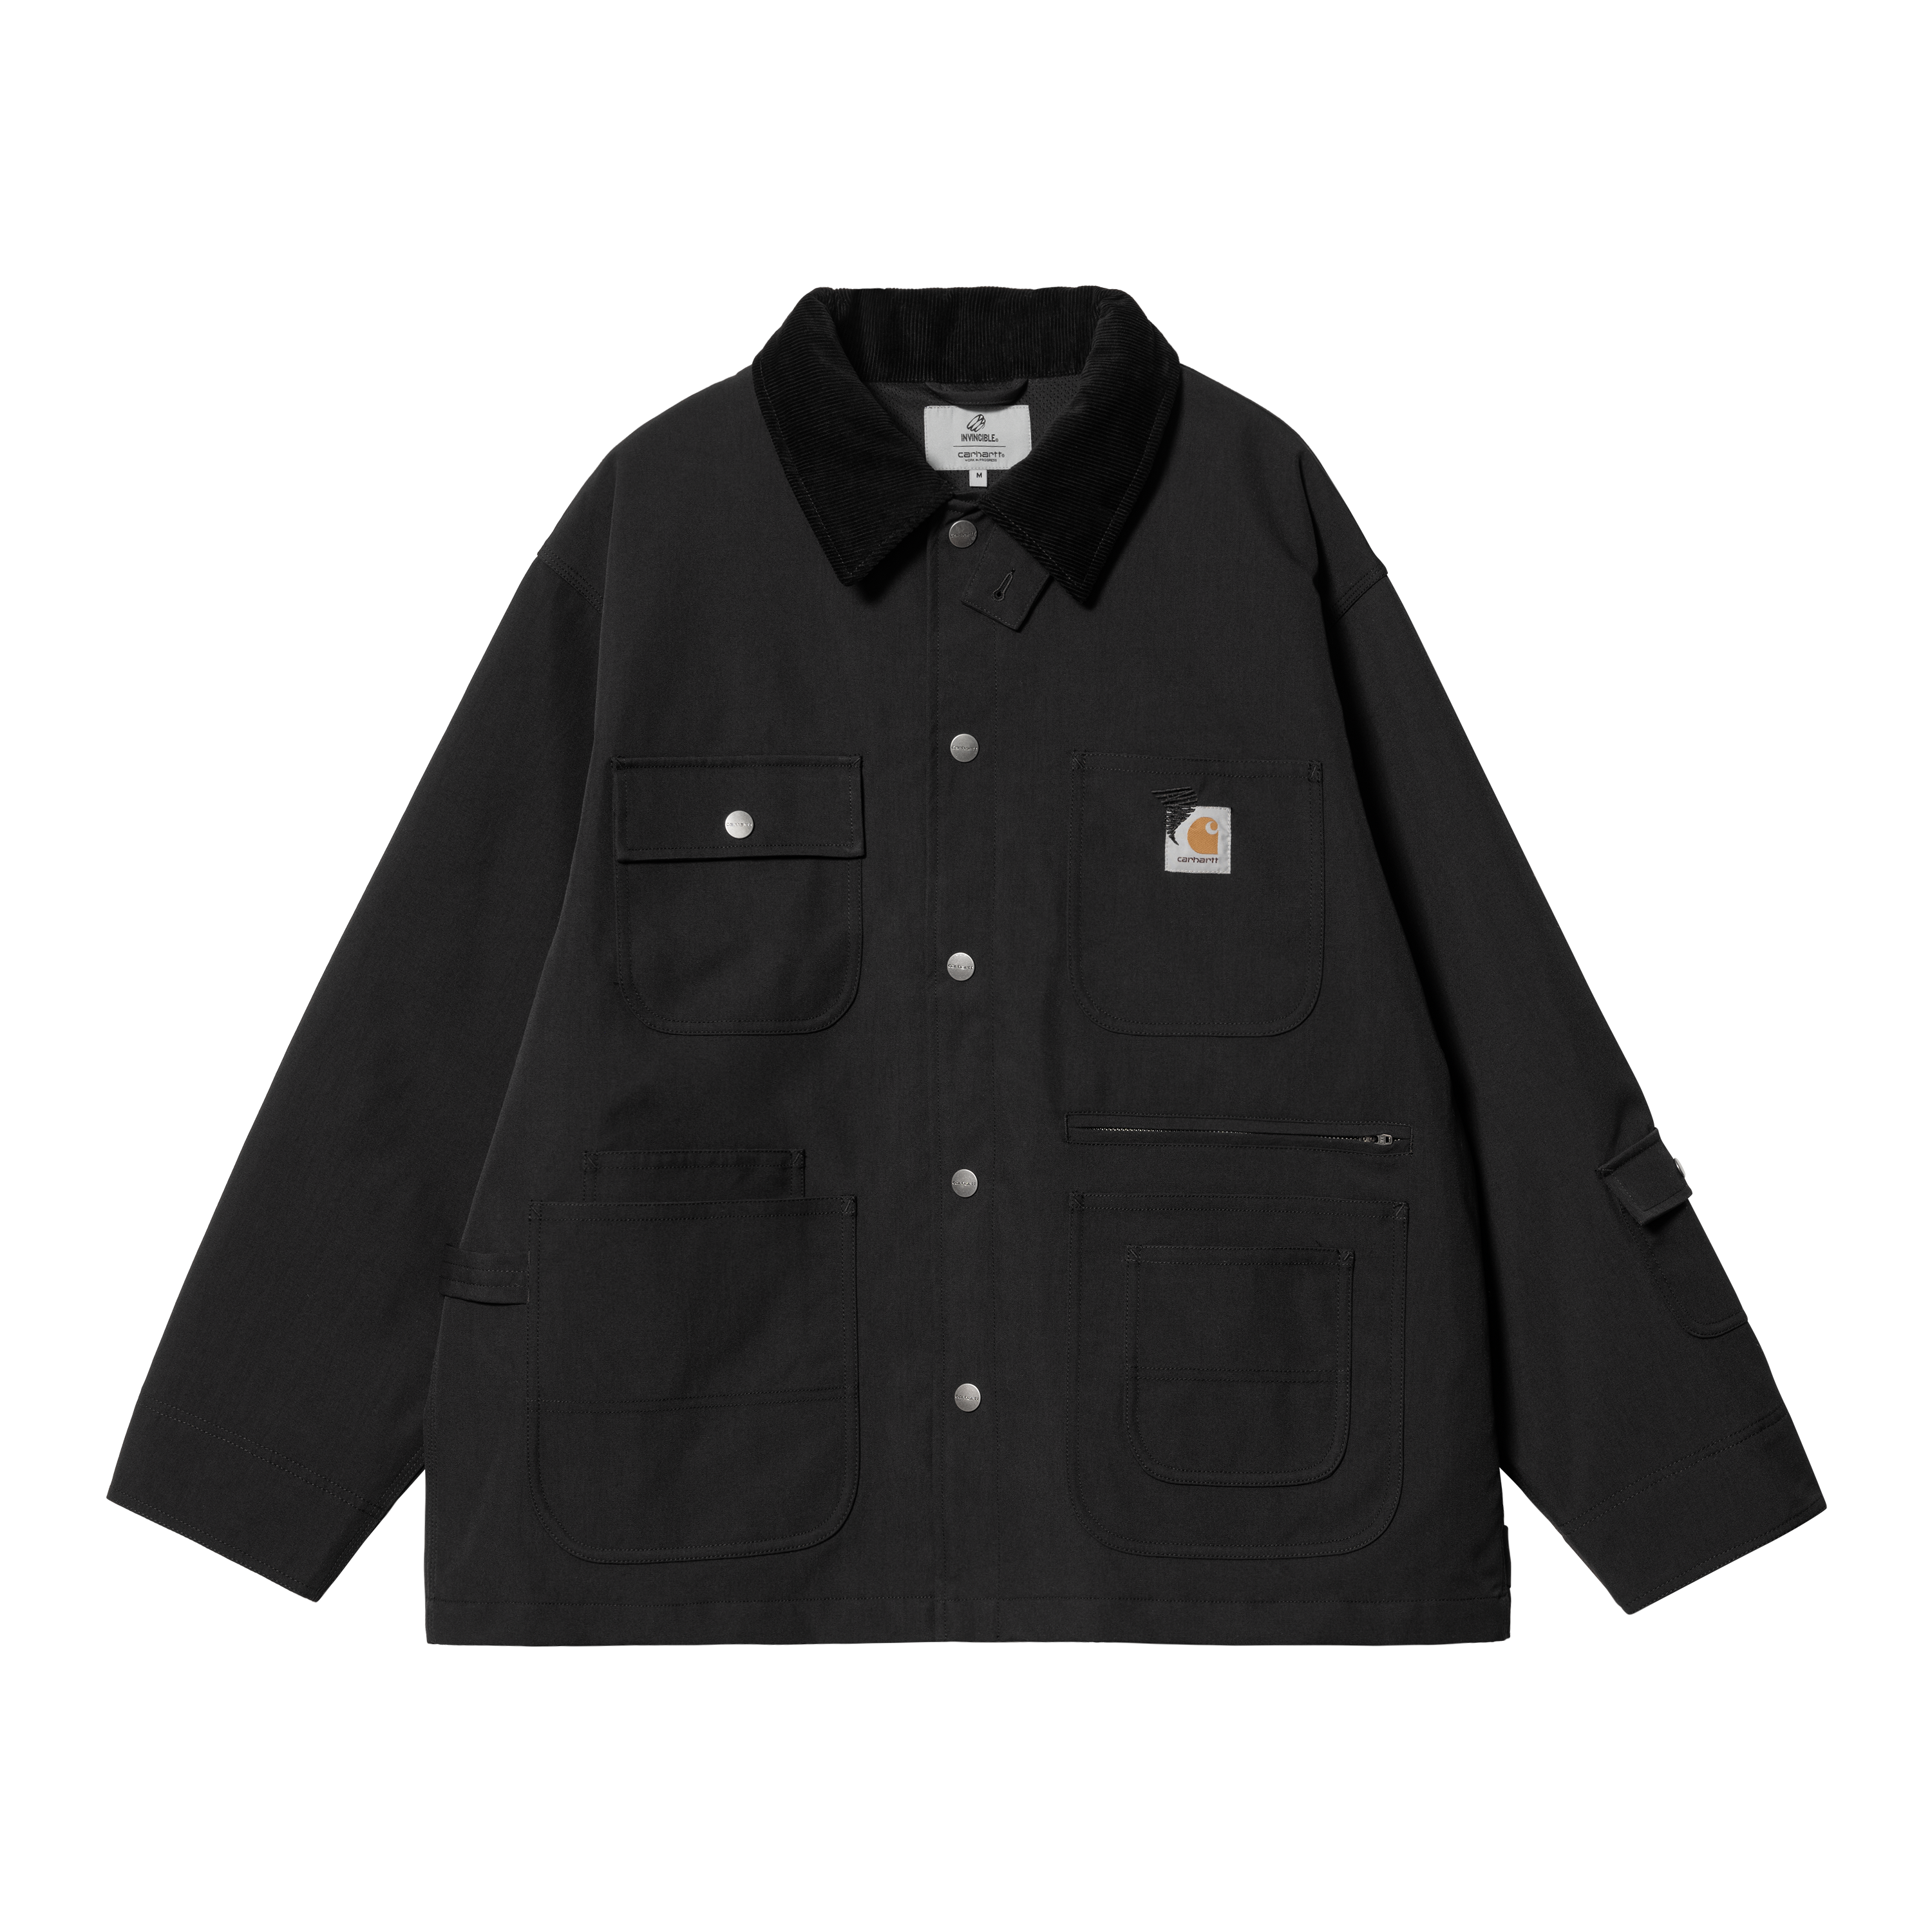 INVINCIBLE® x Carhartt WIP Now Available Online and In-store ...